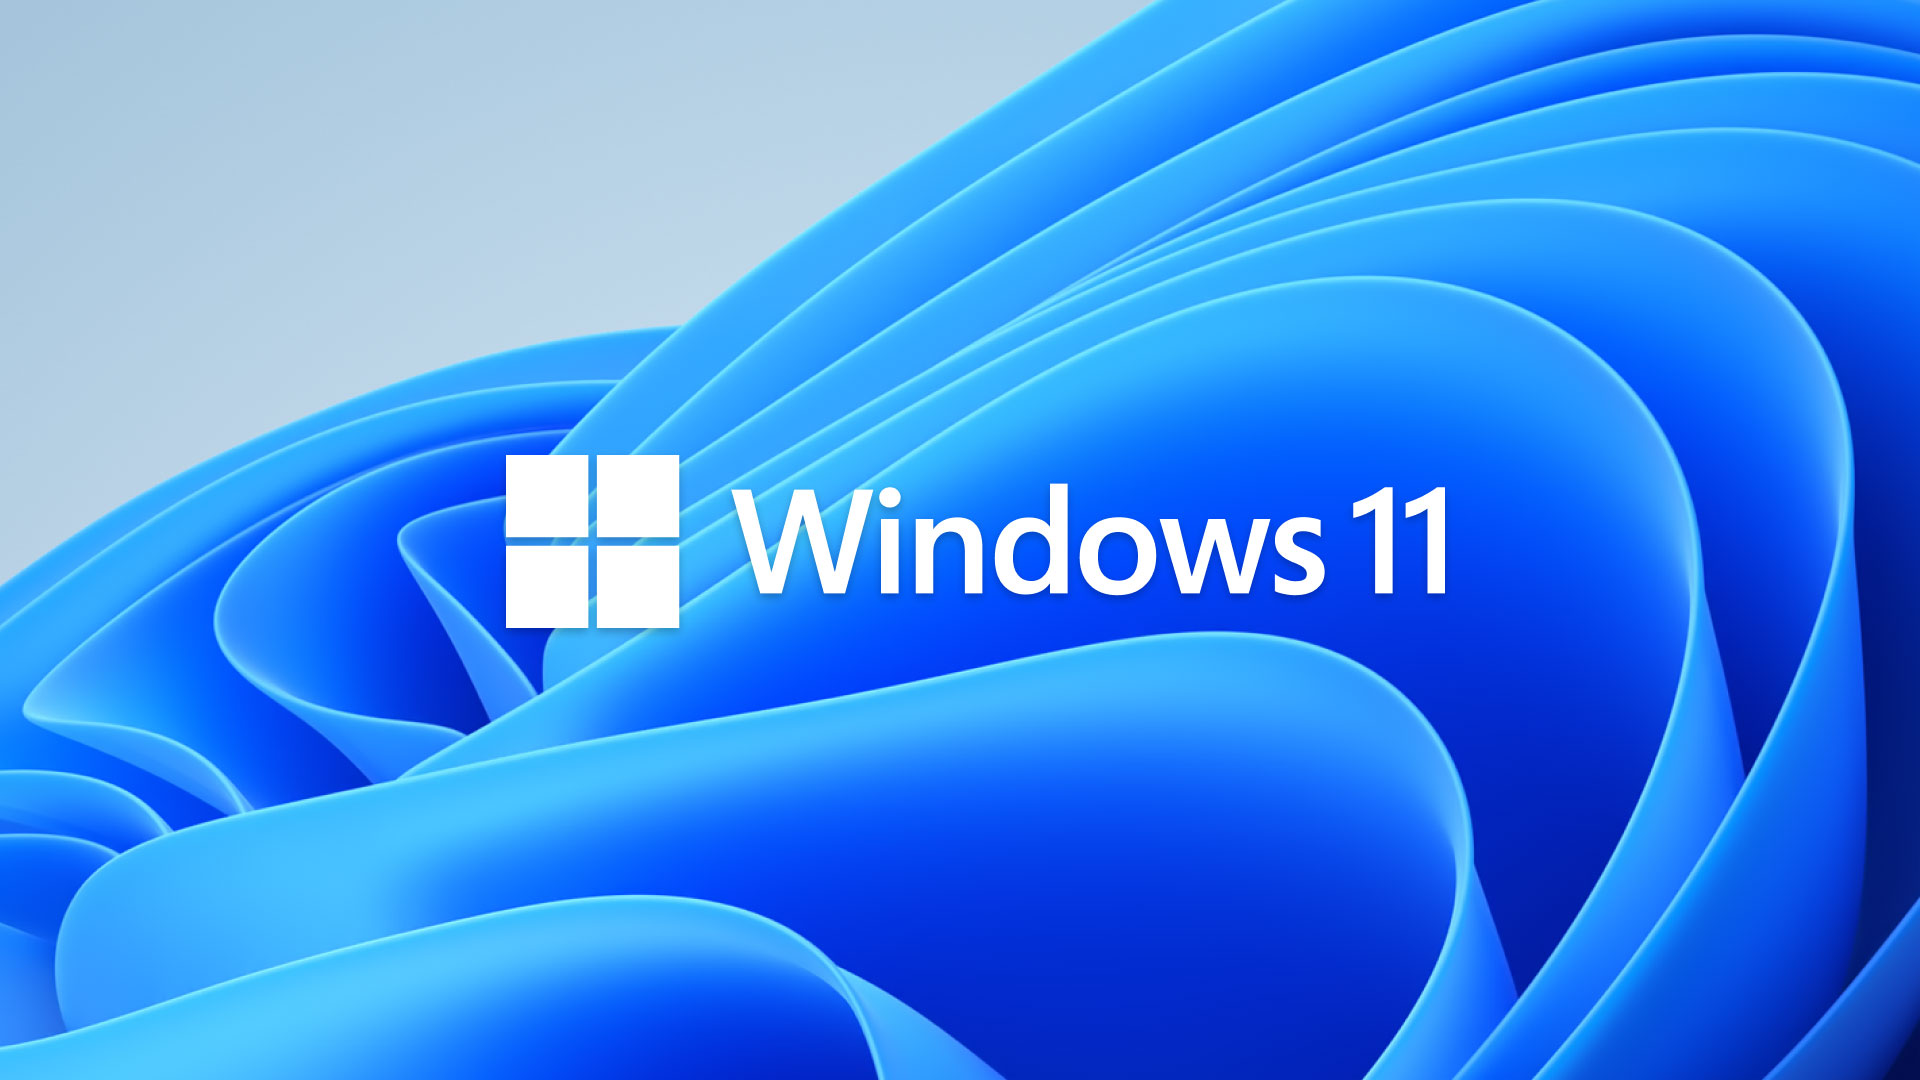 Breaking News Windows 11's Latest Update Could Leave Your Old PC in the Dust – What You Need to Know